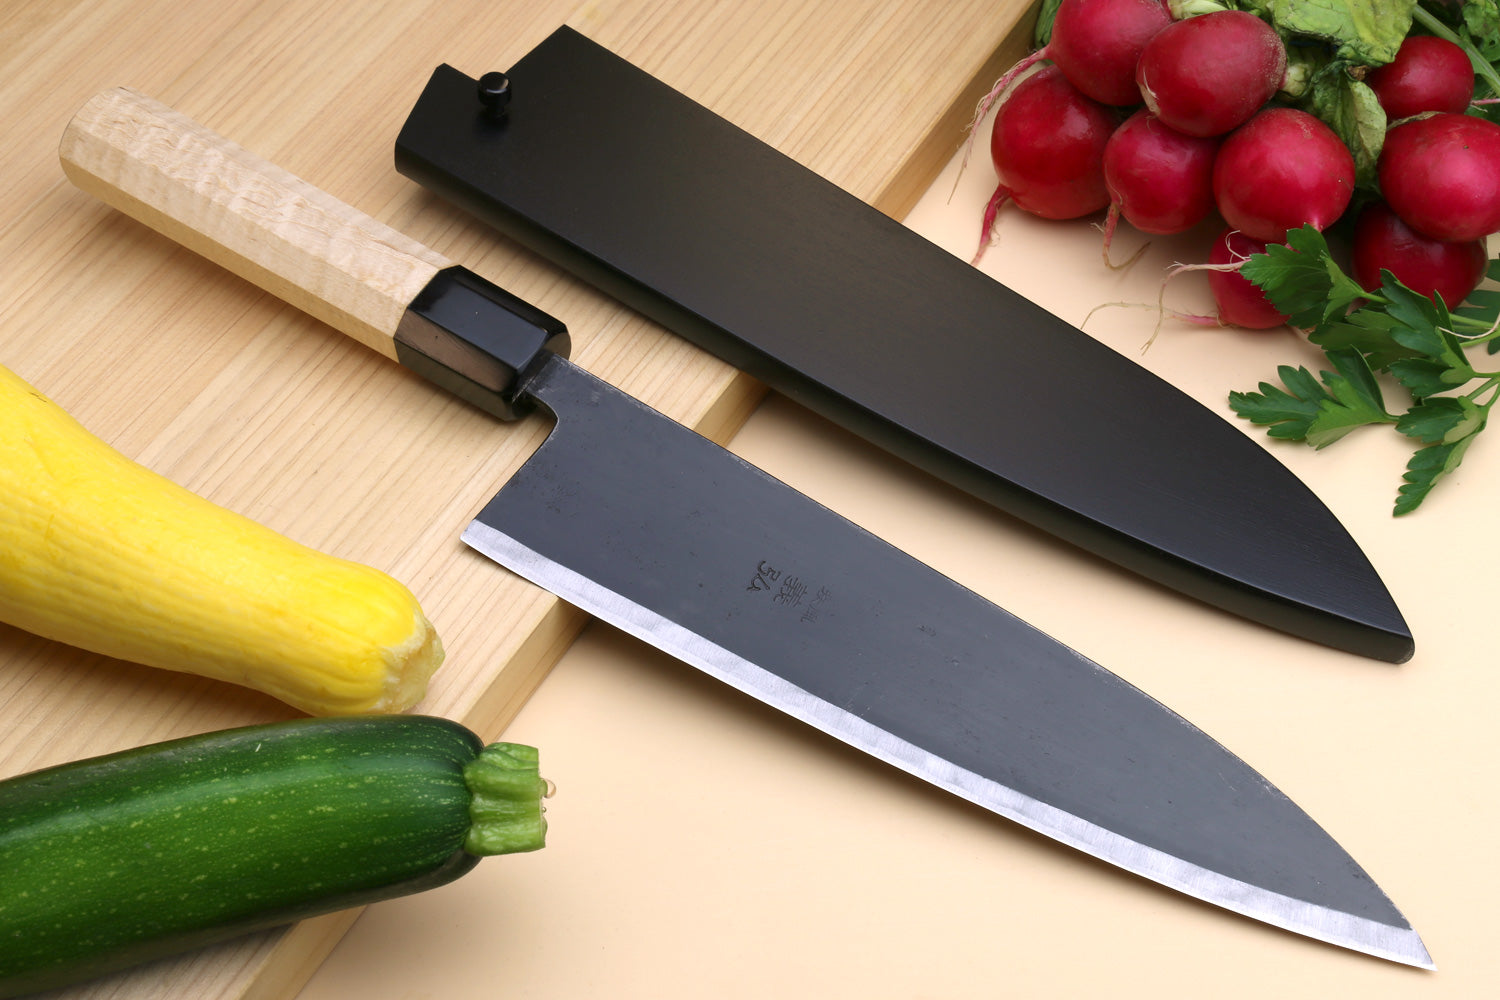 Kuro-Obi Black Titanium Coated Stylish 8 Inch Chef Knife Made from German  High Carbon Stainless Steel Designed in Tokyo Japan for Kitchen and Cooking